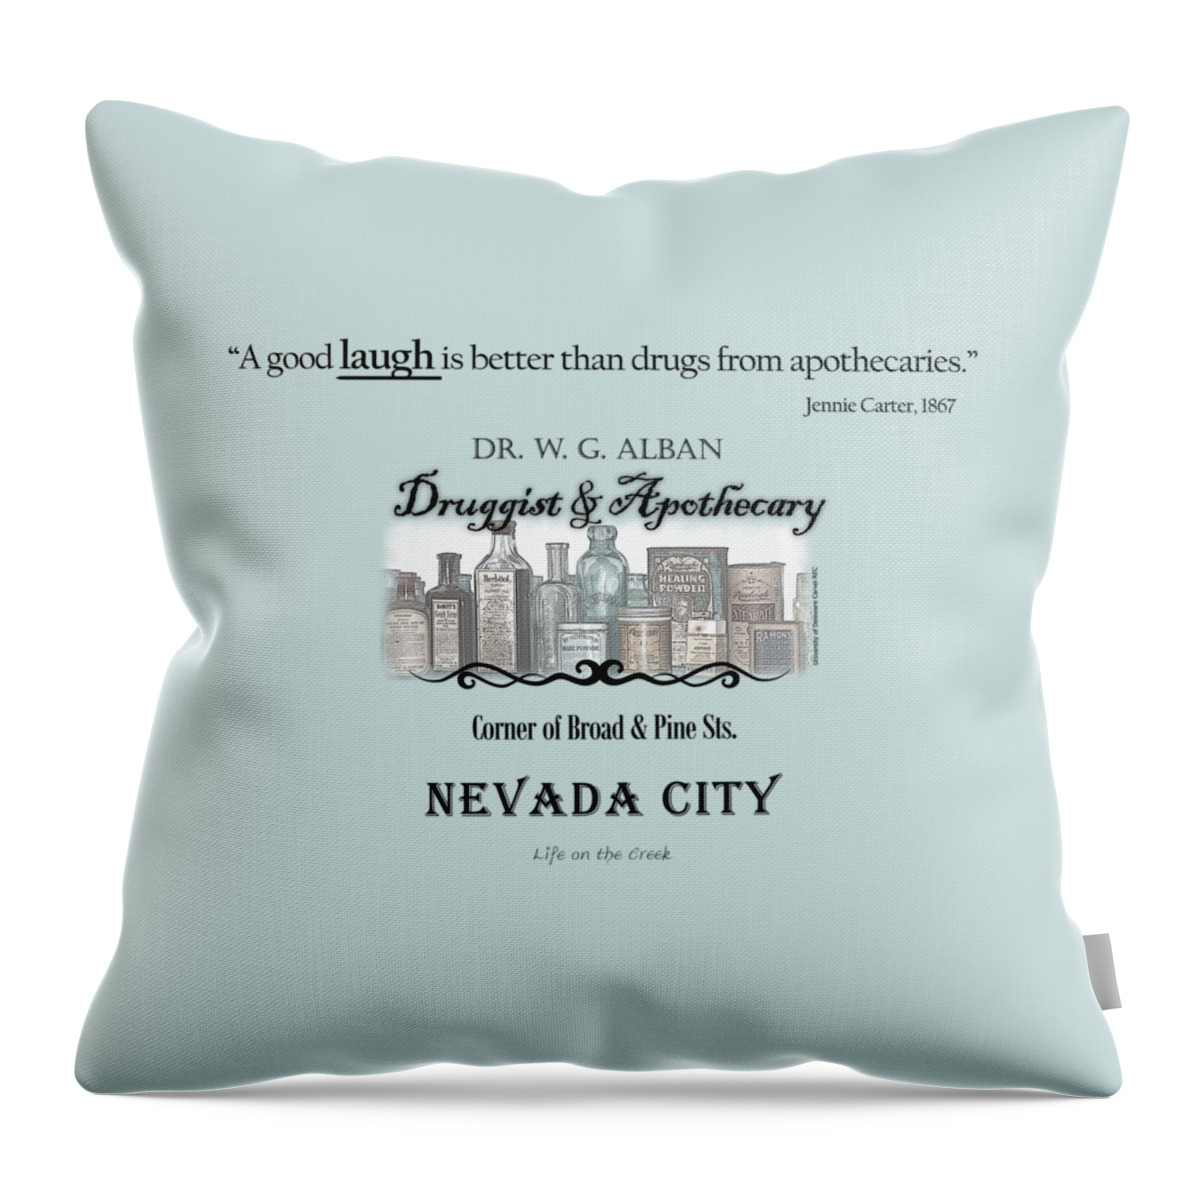 Jennie Carter Throw Pillow featuring the digital art Laughter is the Best Medicine - Apothecary by Lisa Redfern